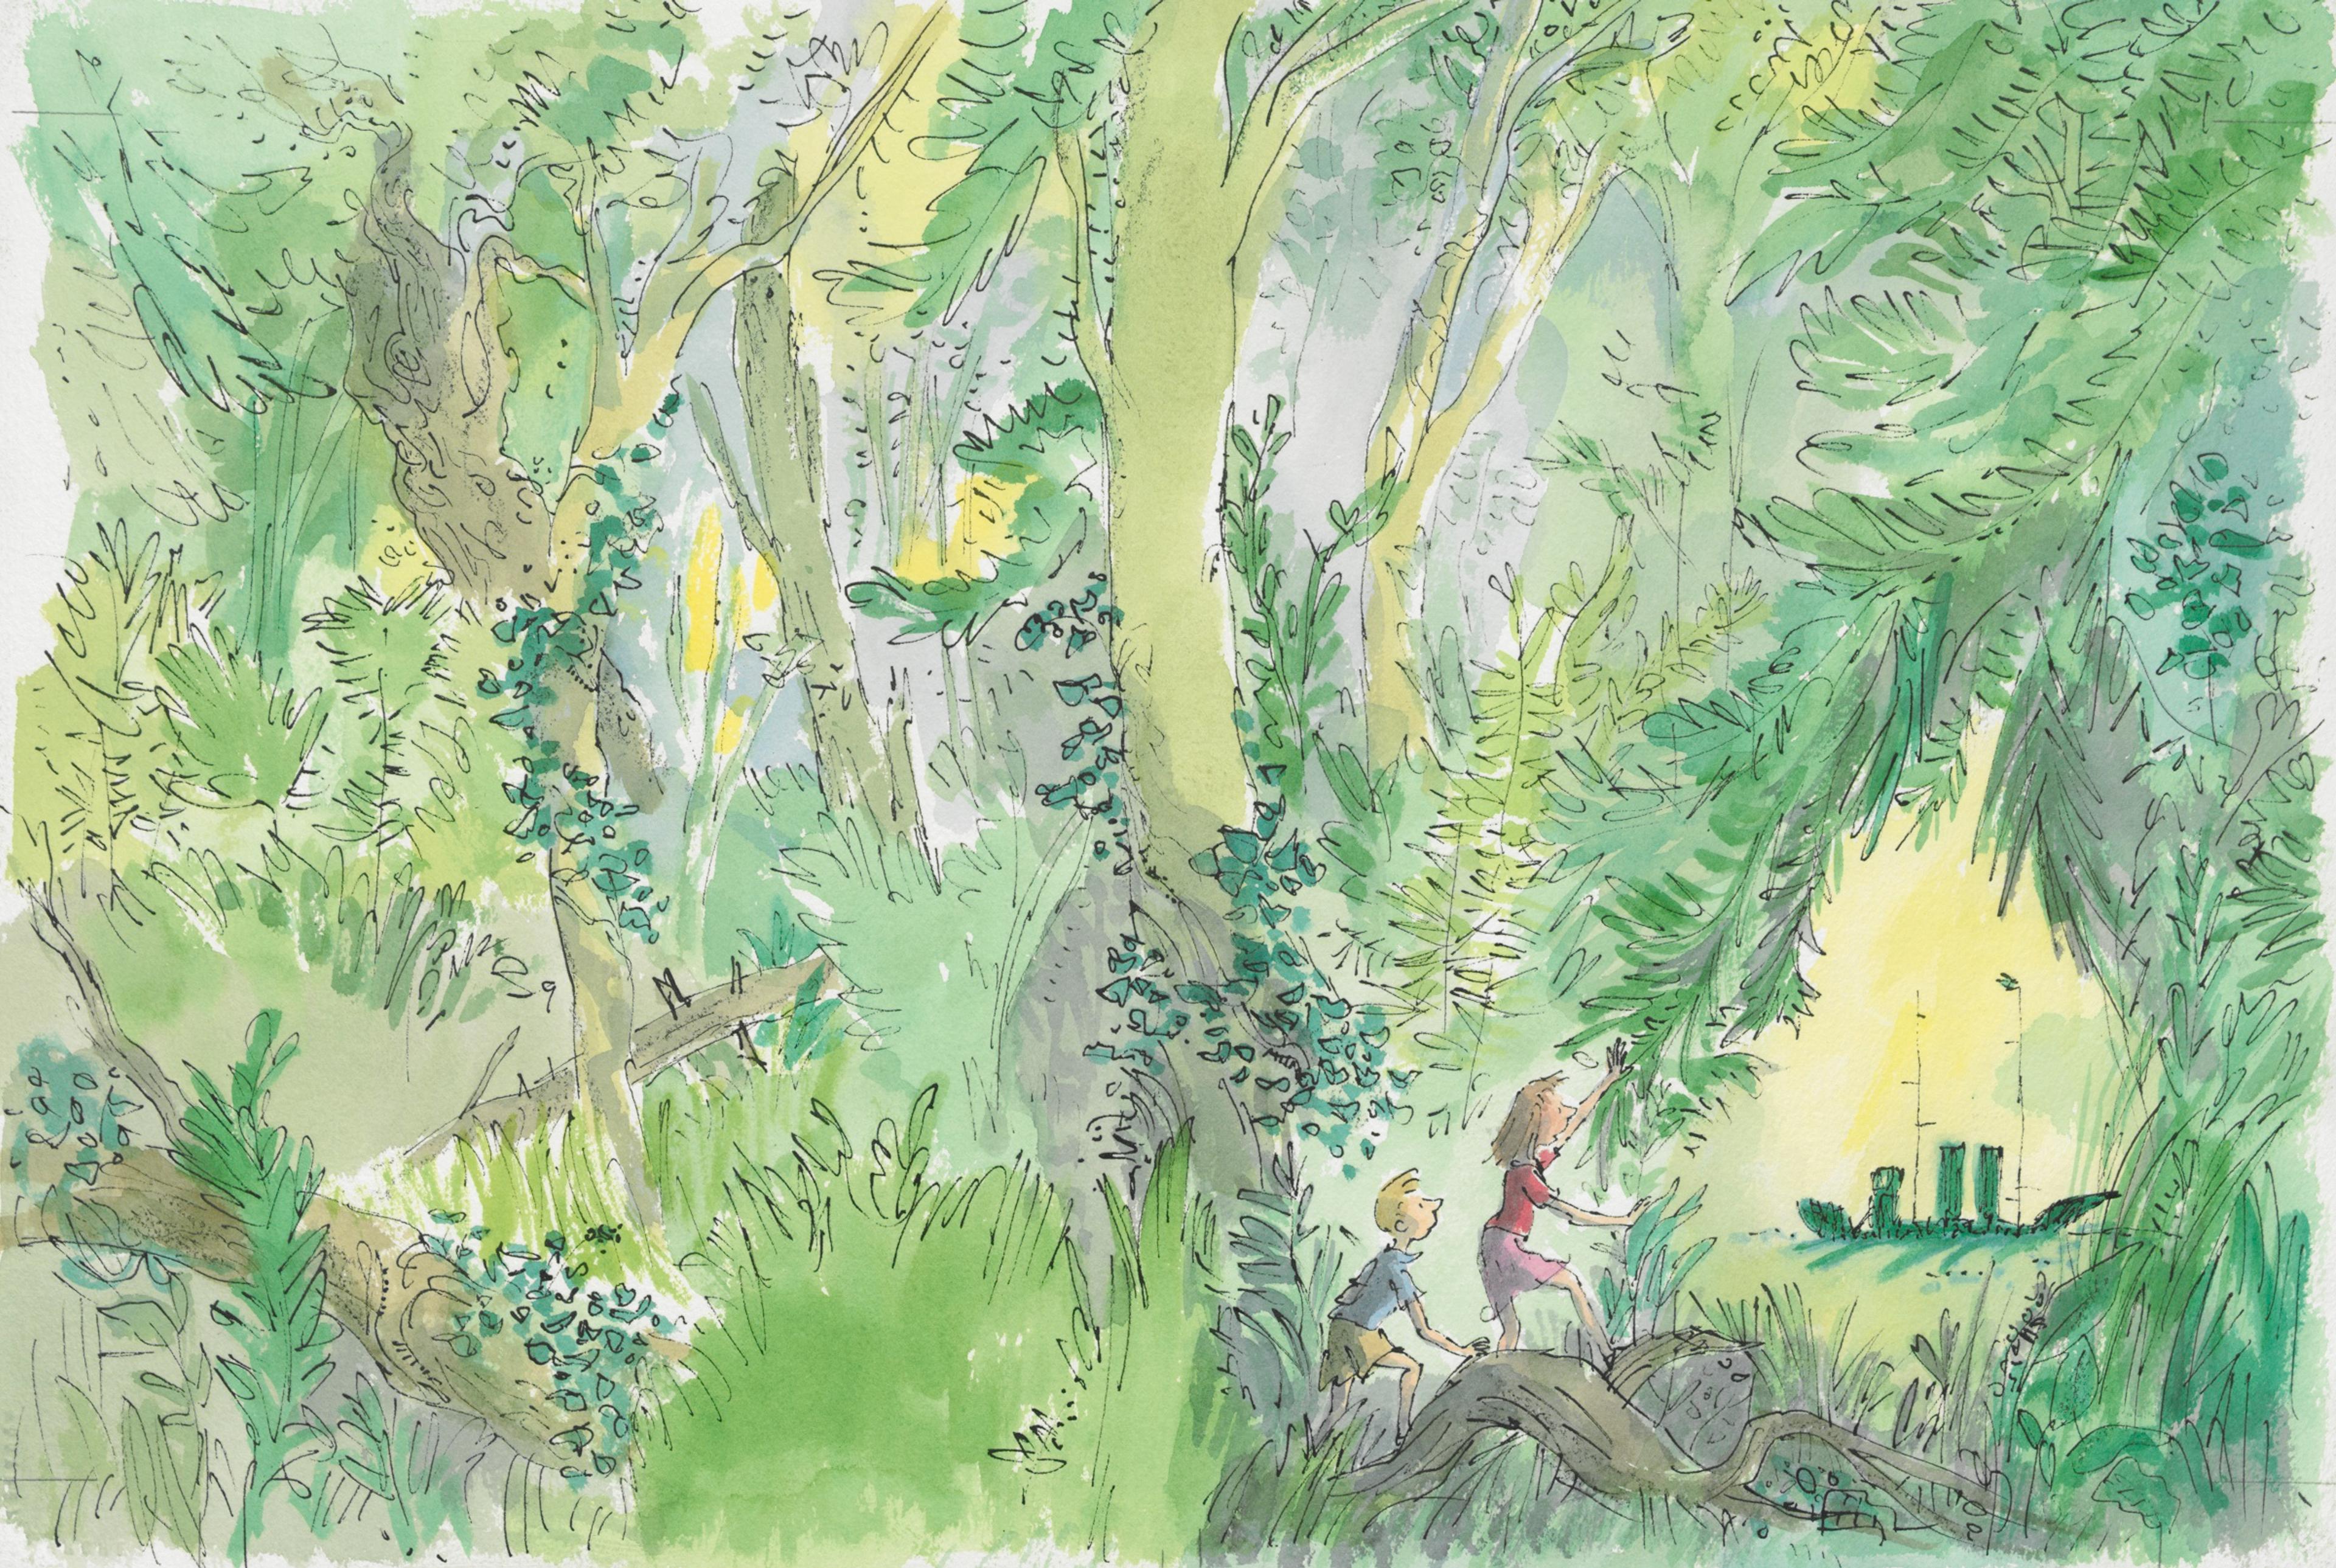 Drawing of two children in a forest looking at a green ship in the distance